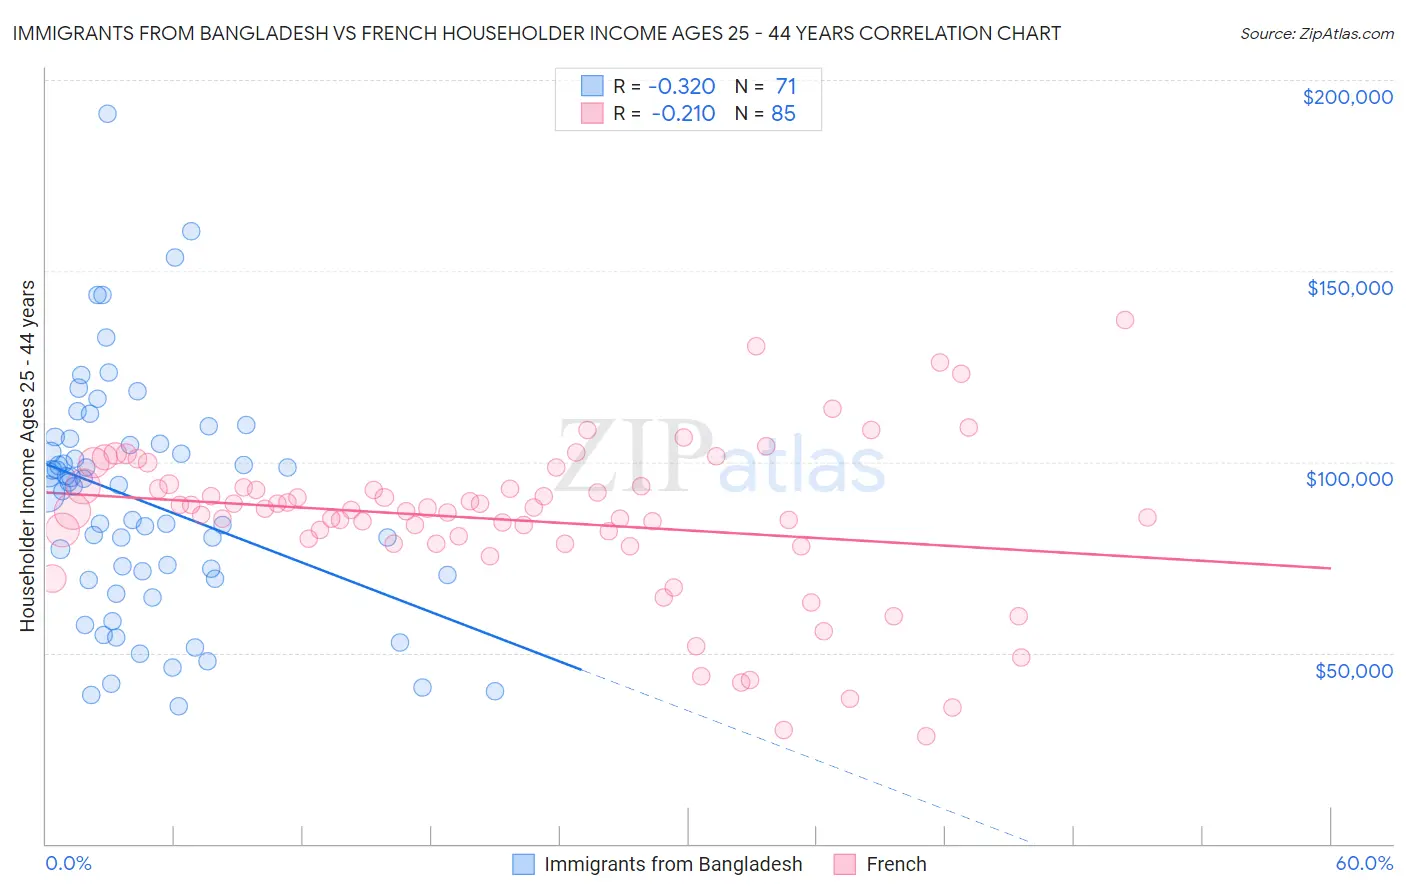 Immigrants from Bangladesh vs French Householder Income Ages 25 - 44 years